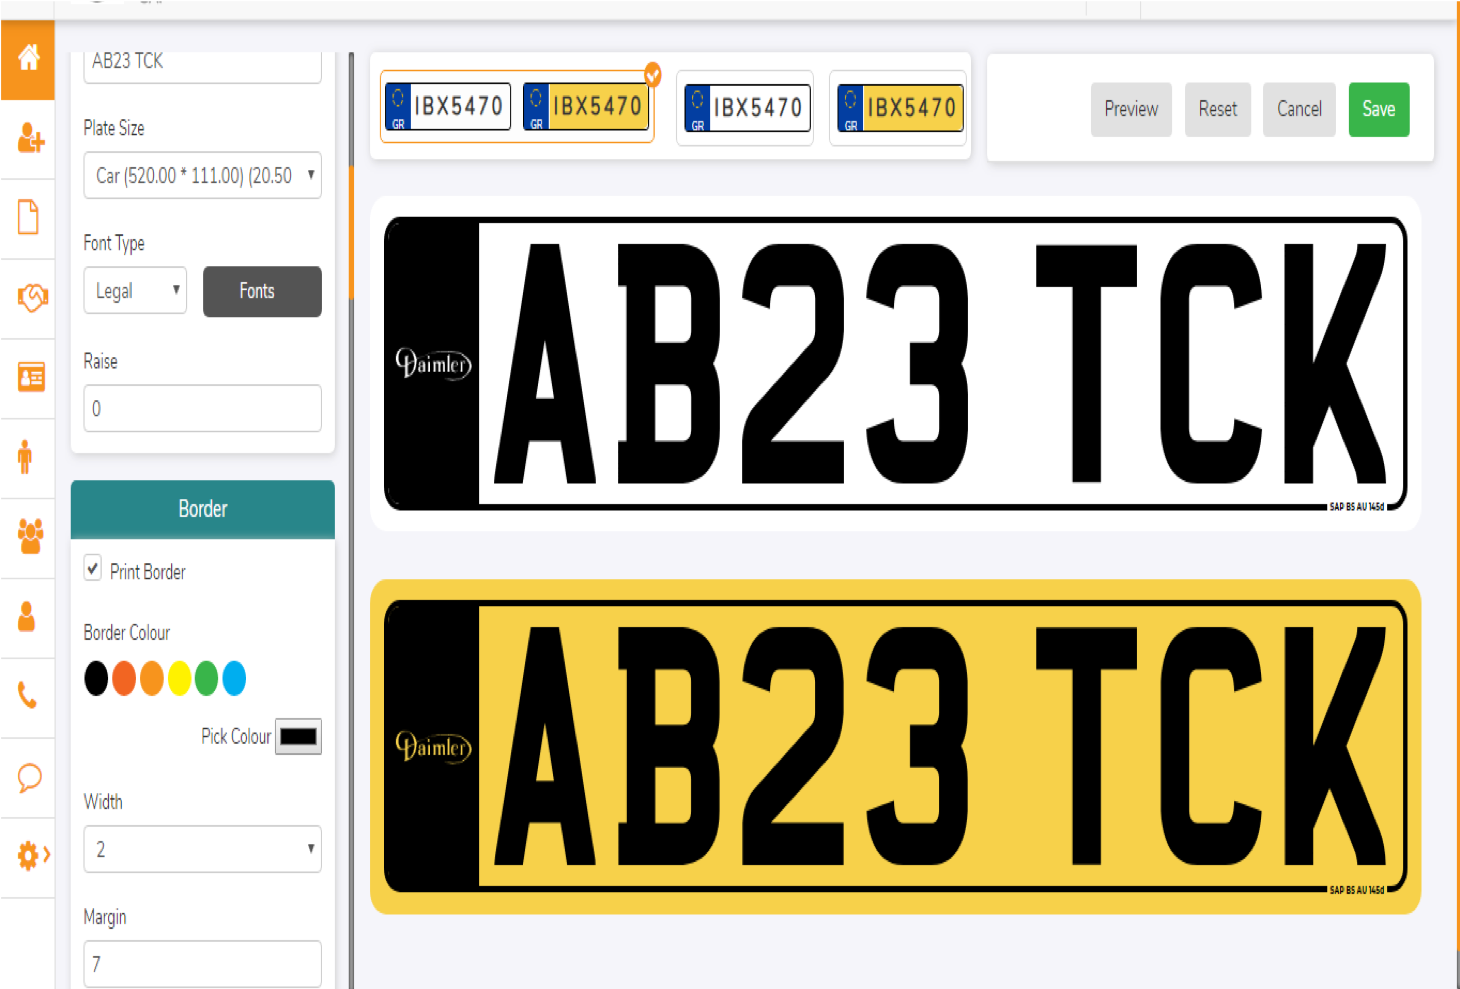 Number Plate Printing Software